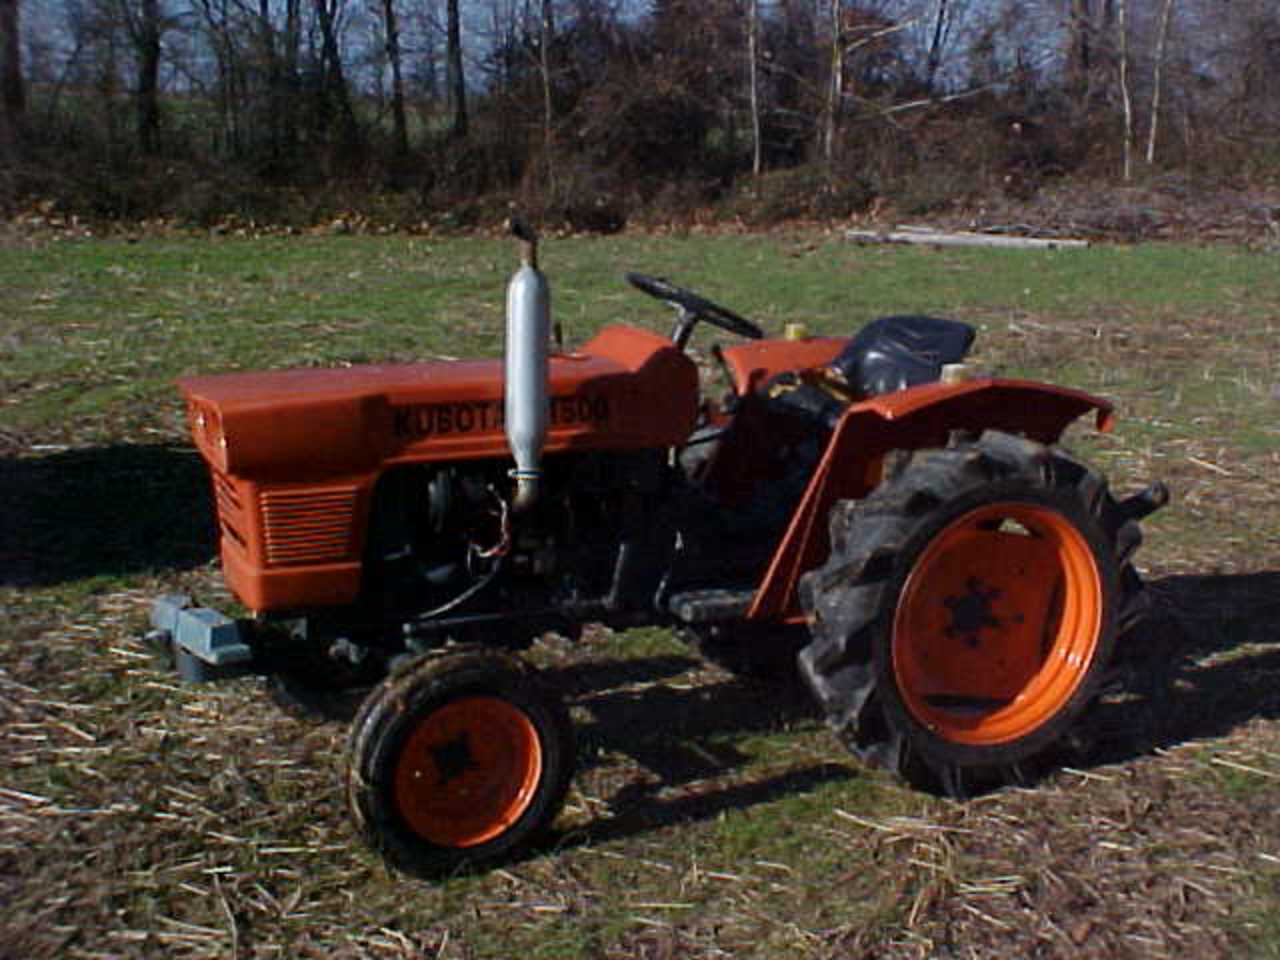 Kubota L1500 "back in baby's arms"